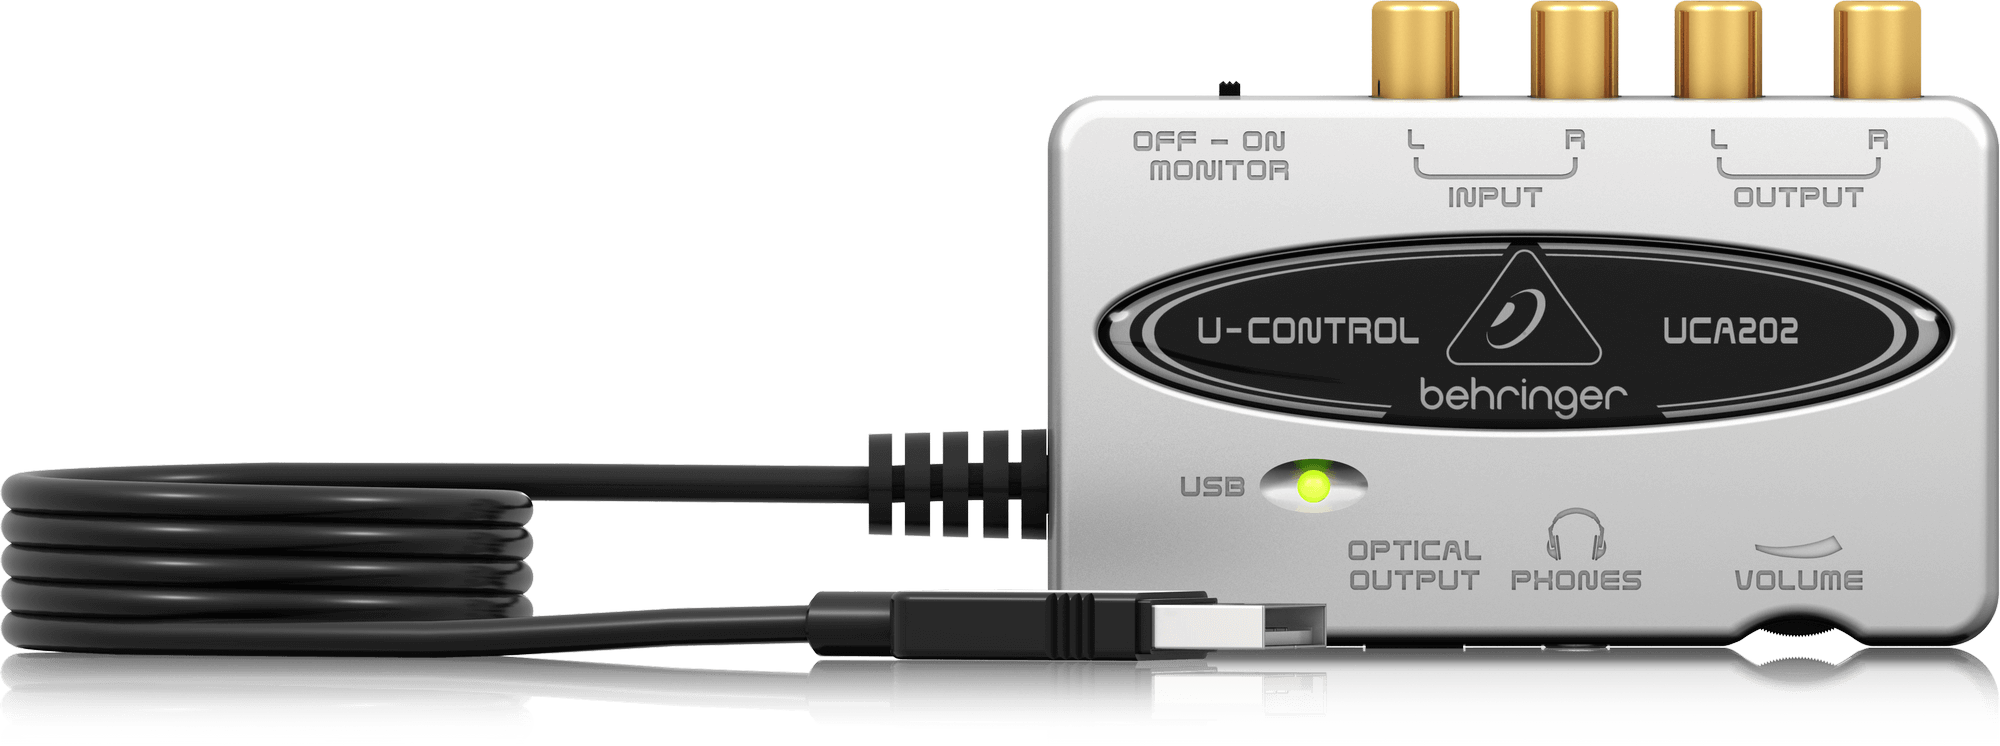 Behringer UCA202 Ultra-Low Latency 2 In/2 Out USB/Audio Interface with Digital Output Product Features